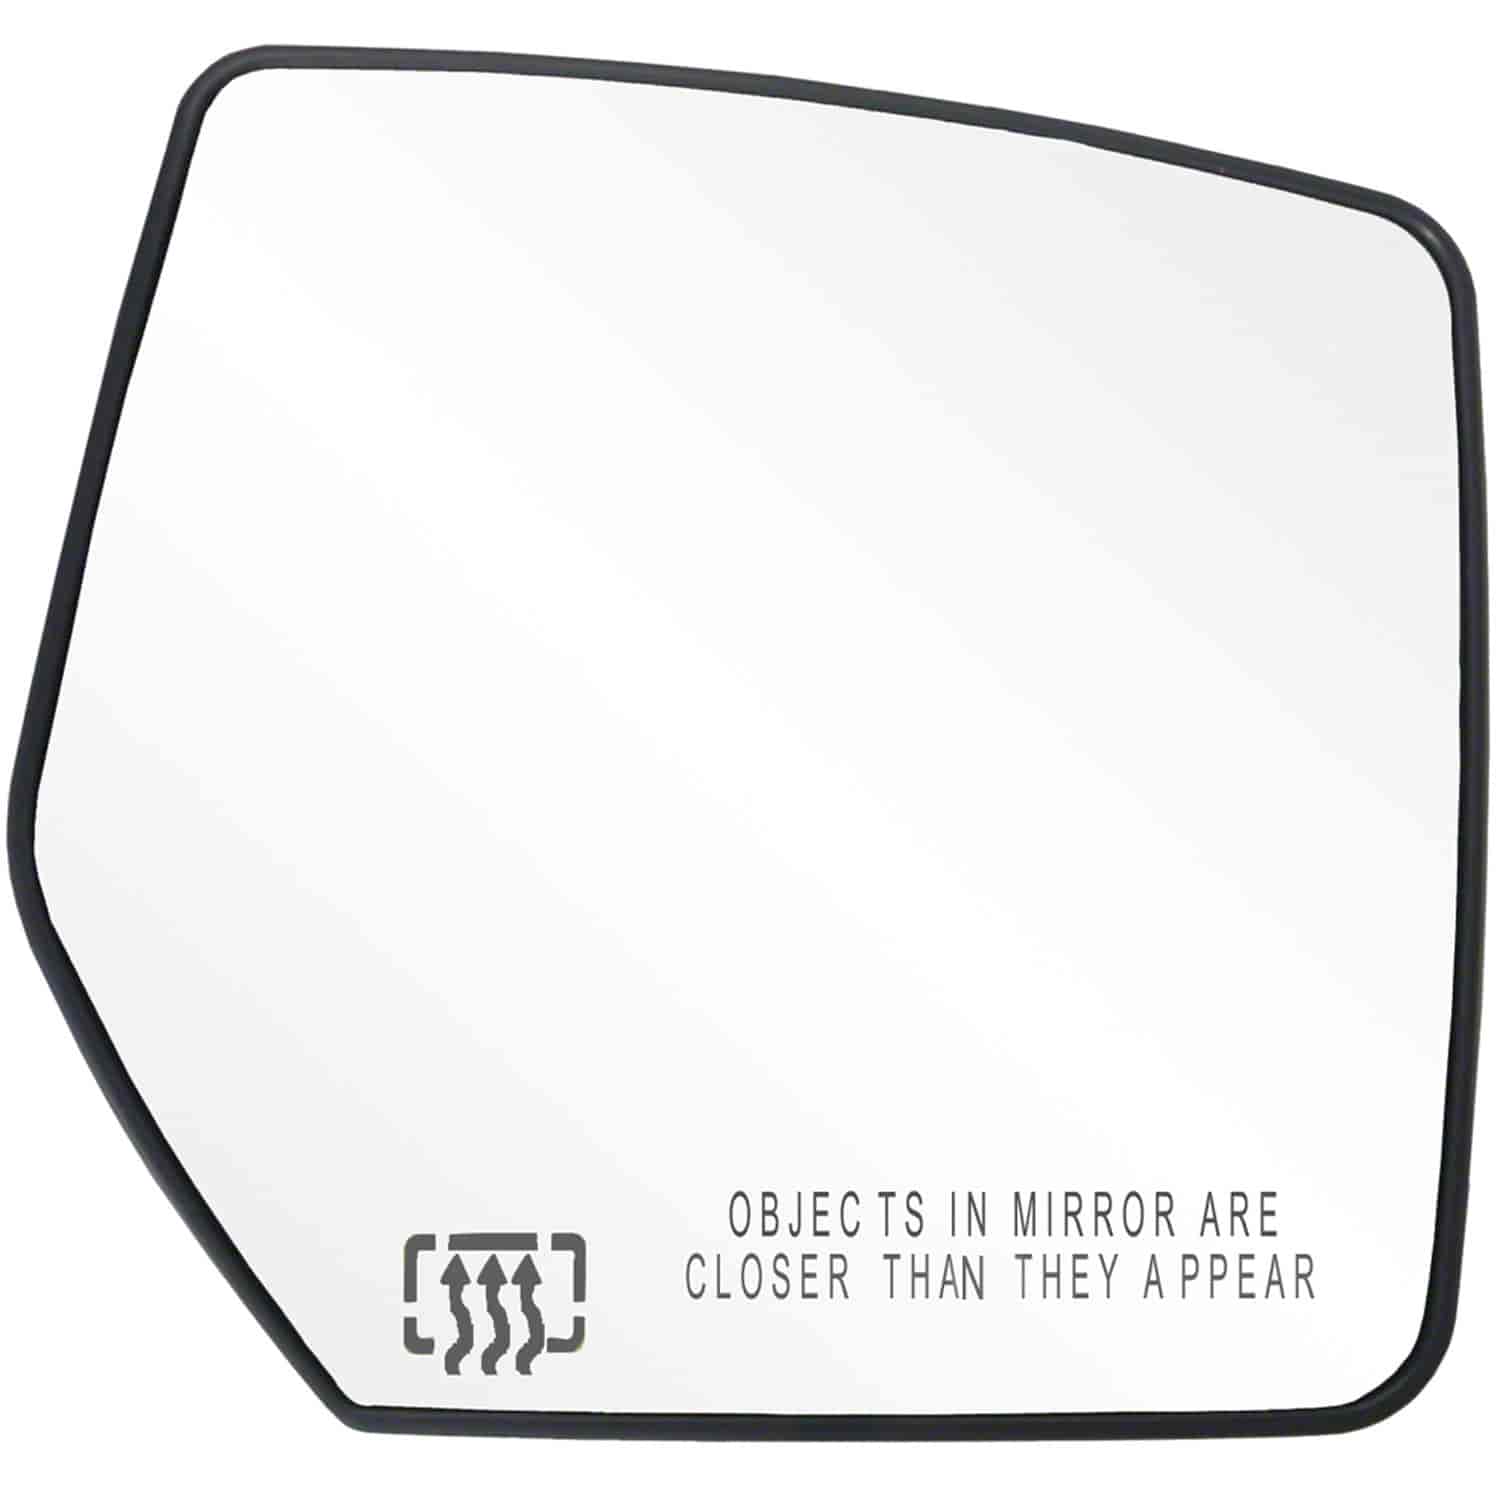 Heated Replacement Glass Assembly for 07-11 Nitro; 08-12Liberty replace your cracked or broken passe